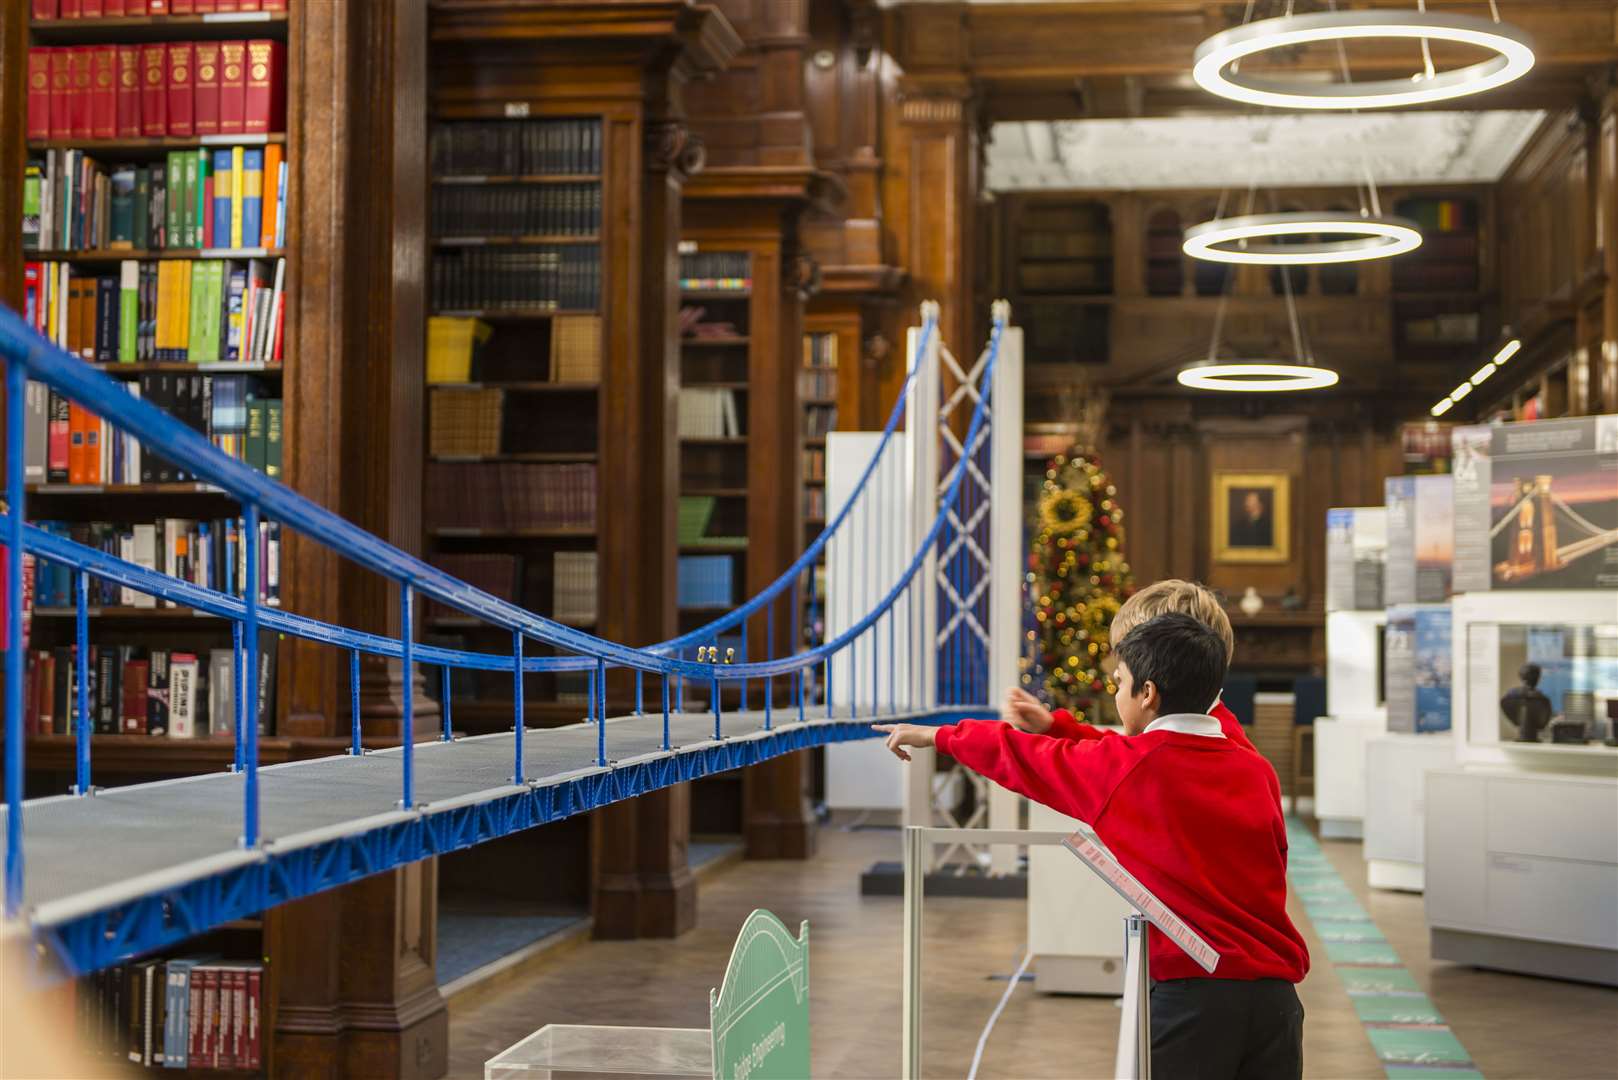 The world-record breaking bridge when it was hosted in the library of the Institute of Civil Engineers